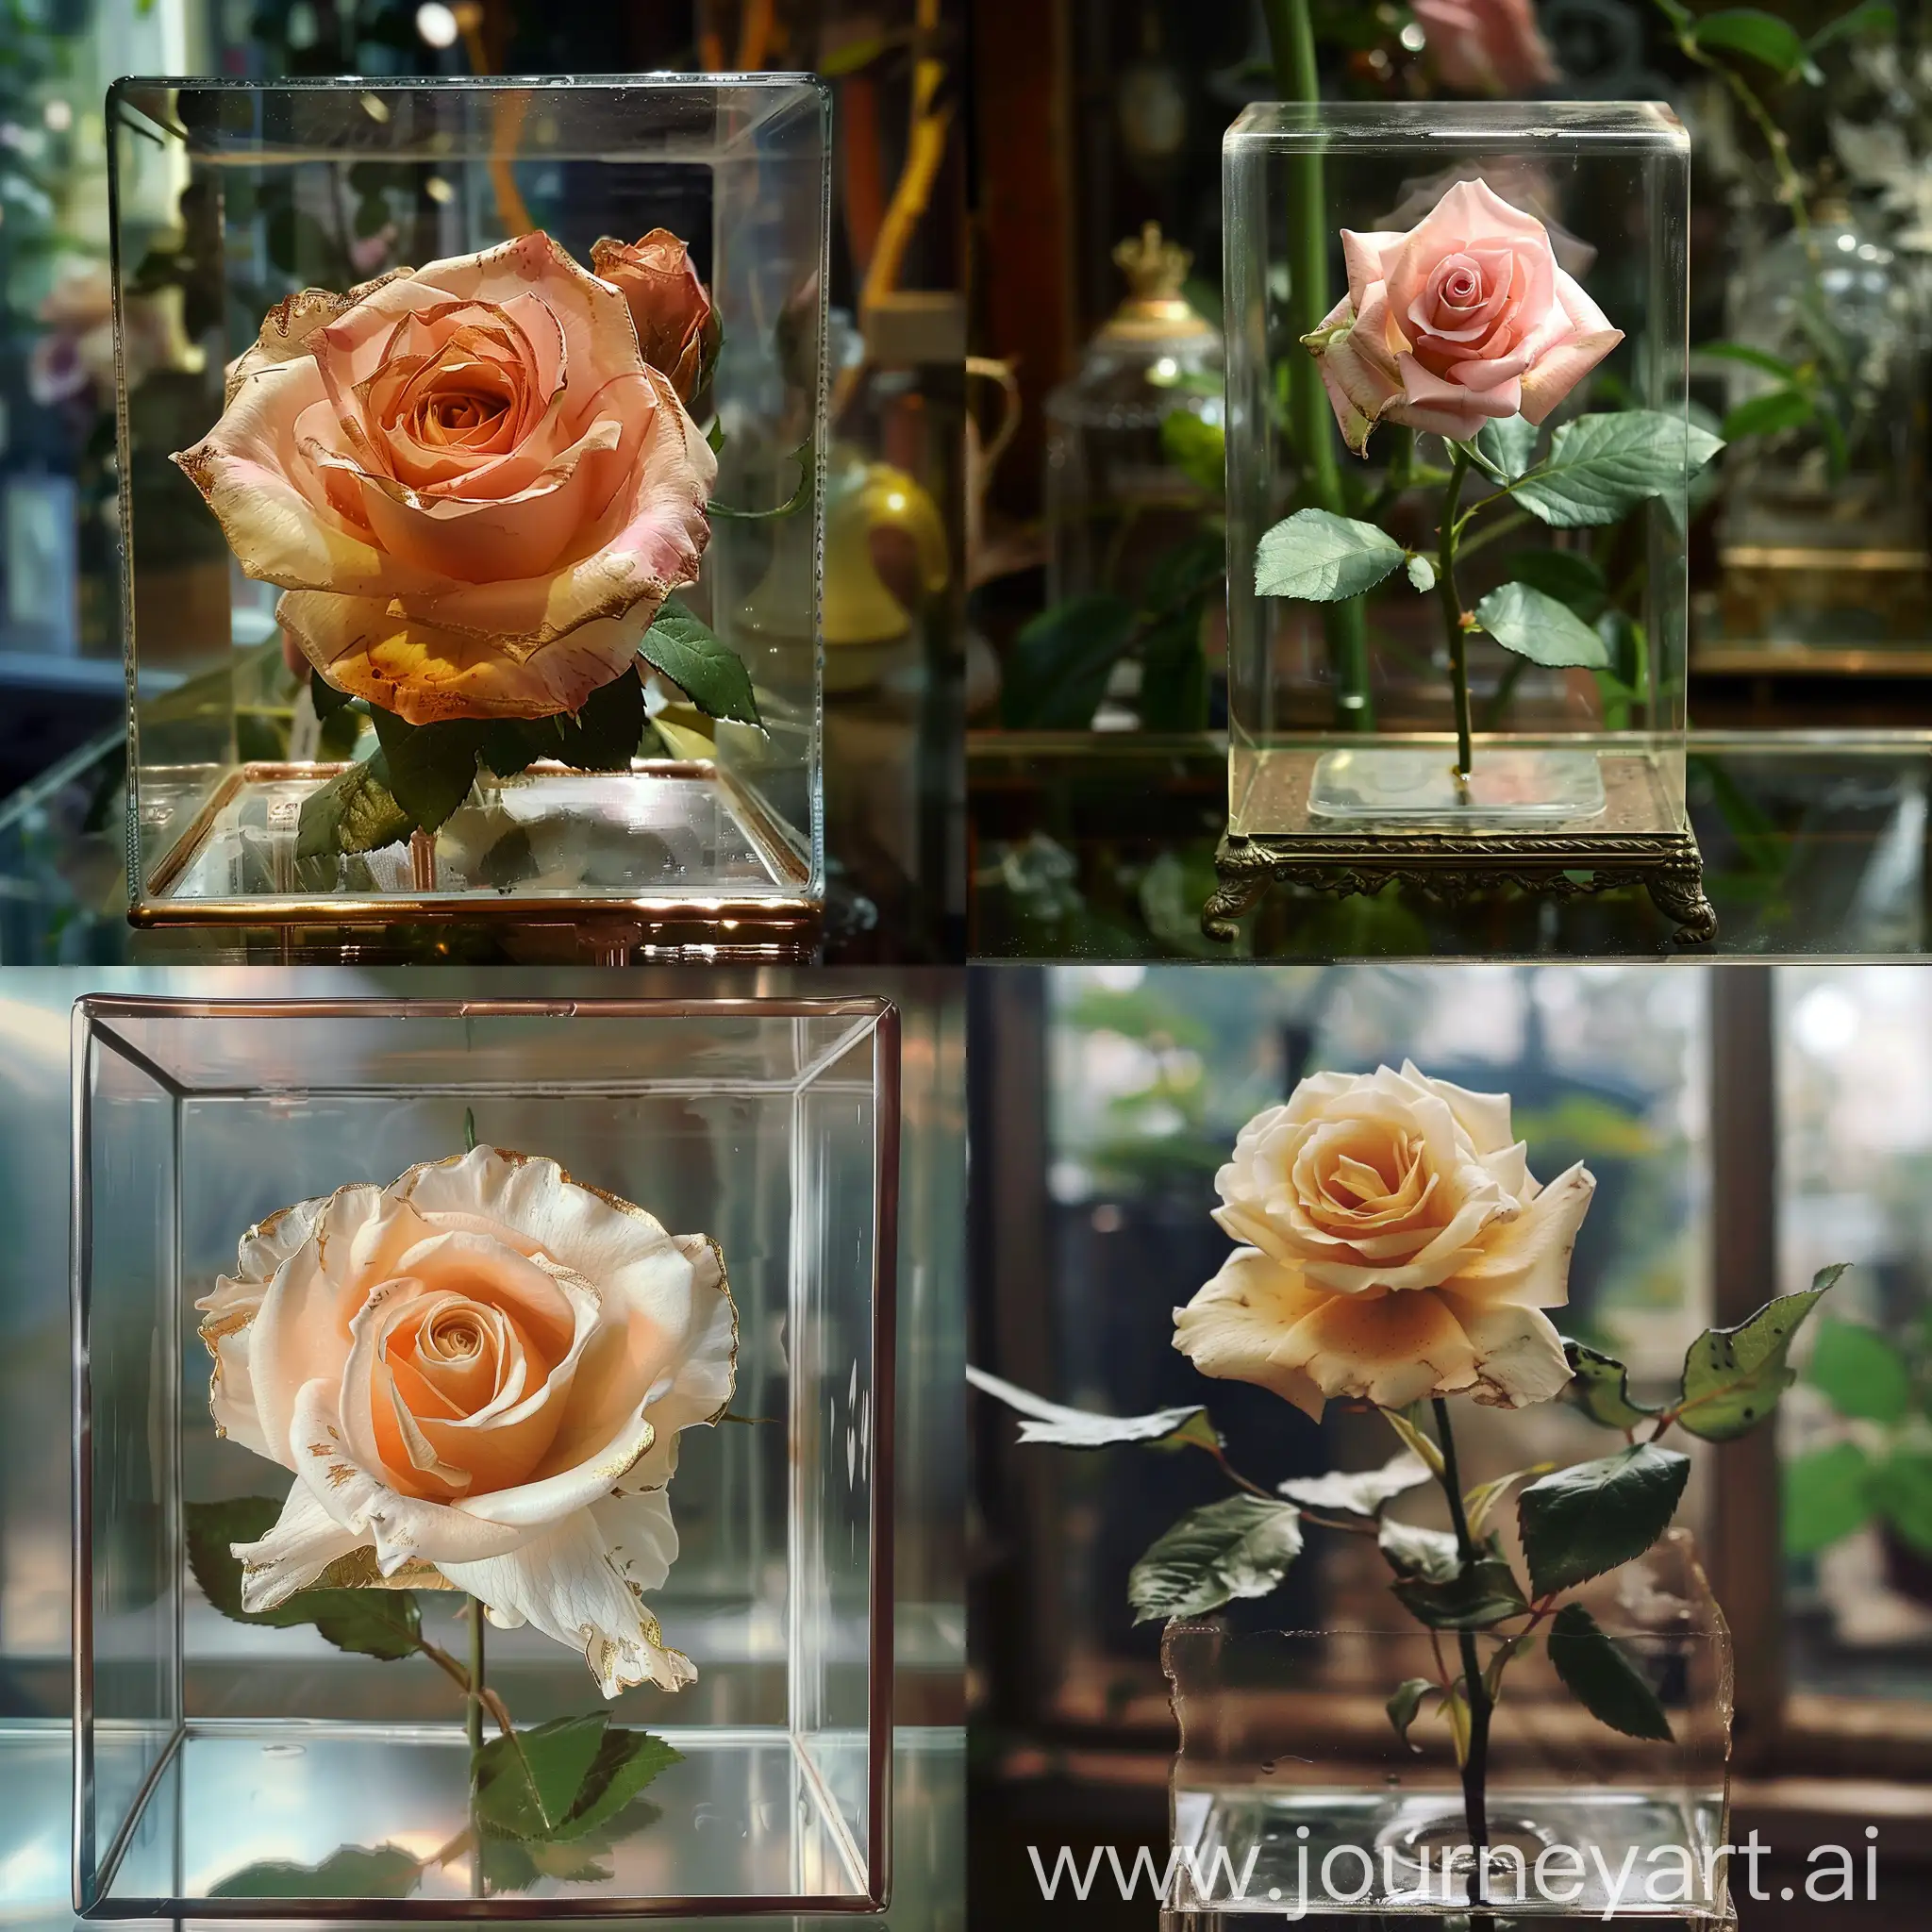 Exquisite-Royal-Rose-Encased-in-Glass-A-Masterpiece-of-Delicate-Beauty